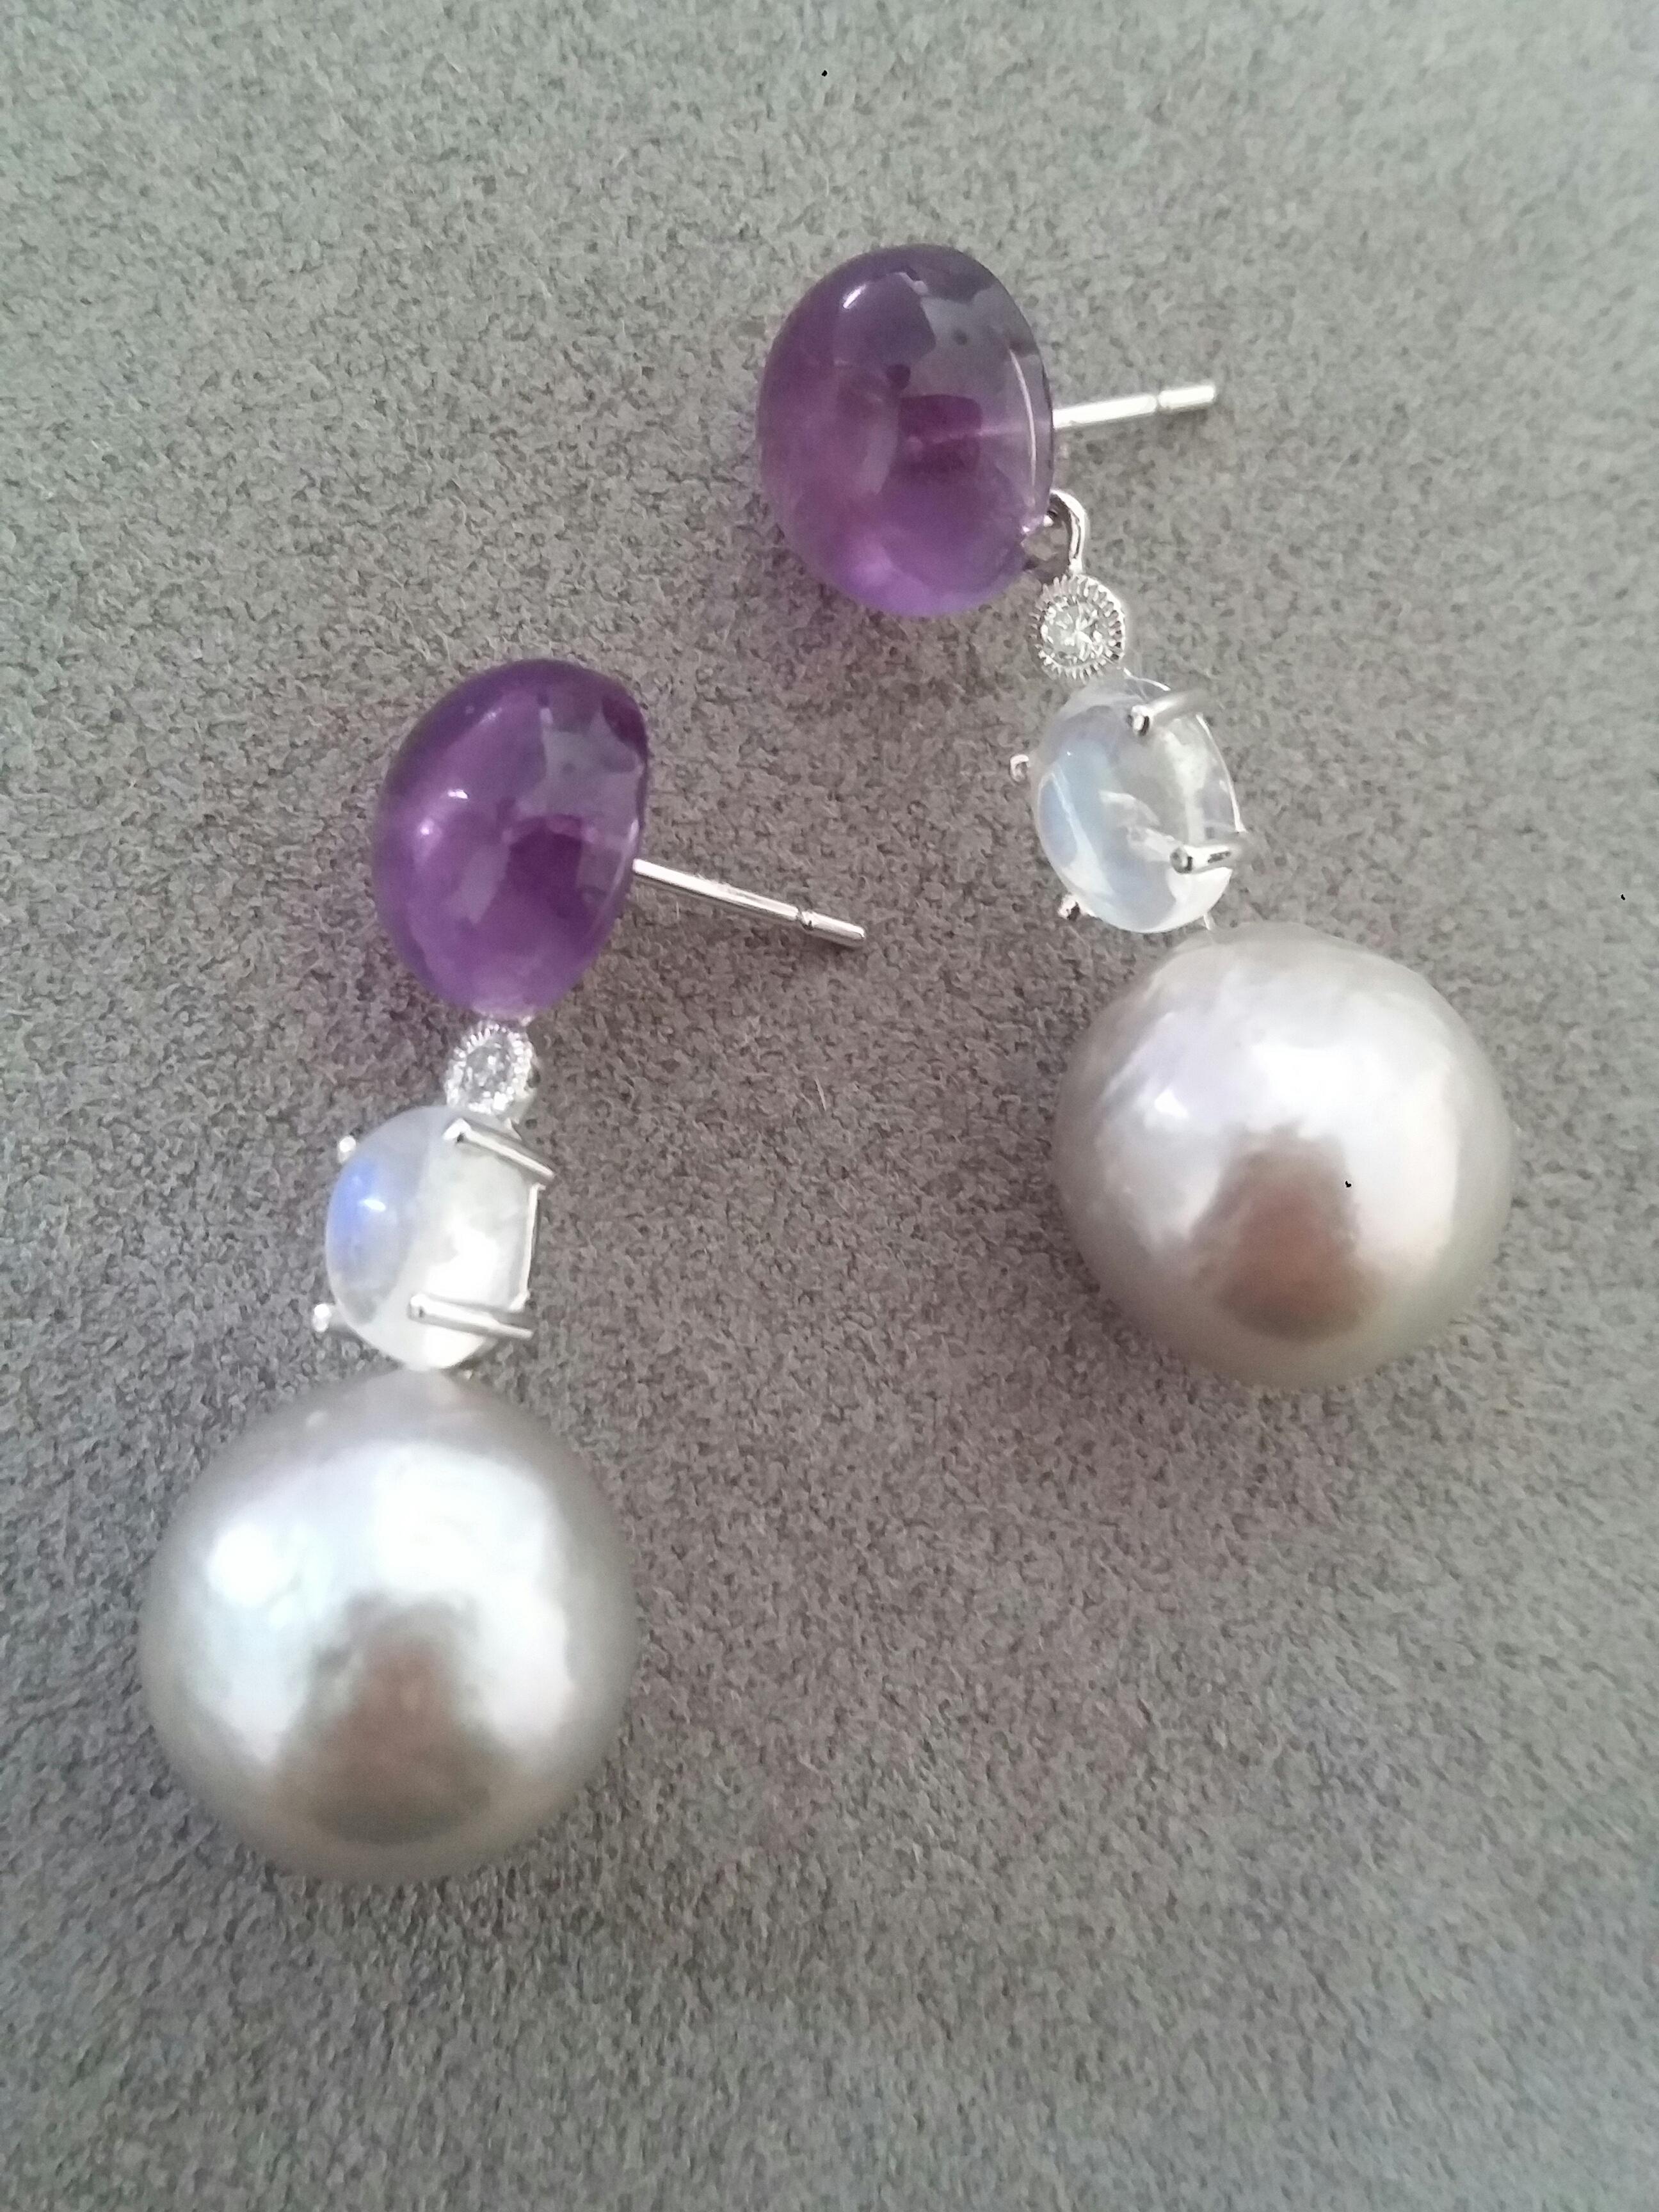 Tops are 2 Amethyst round cabochons,then 2 oval Monstones and Diamonds set with White Gold are holding 2  Grey Baroque Pearls

In 1978 our workshop started in Italy to make simple-chic Art Deco style jewellery, completely handmade and using the